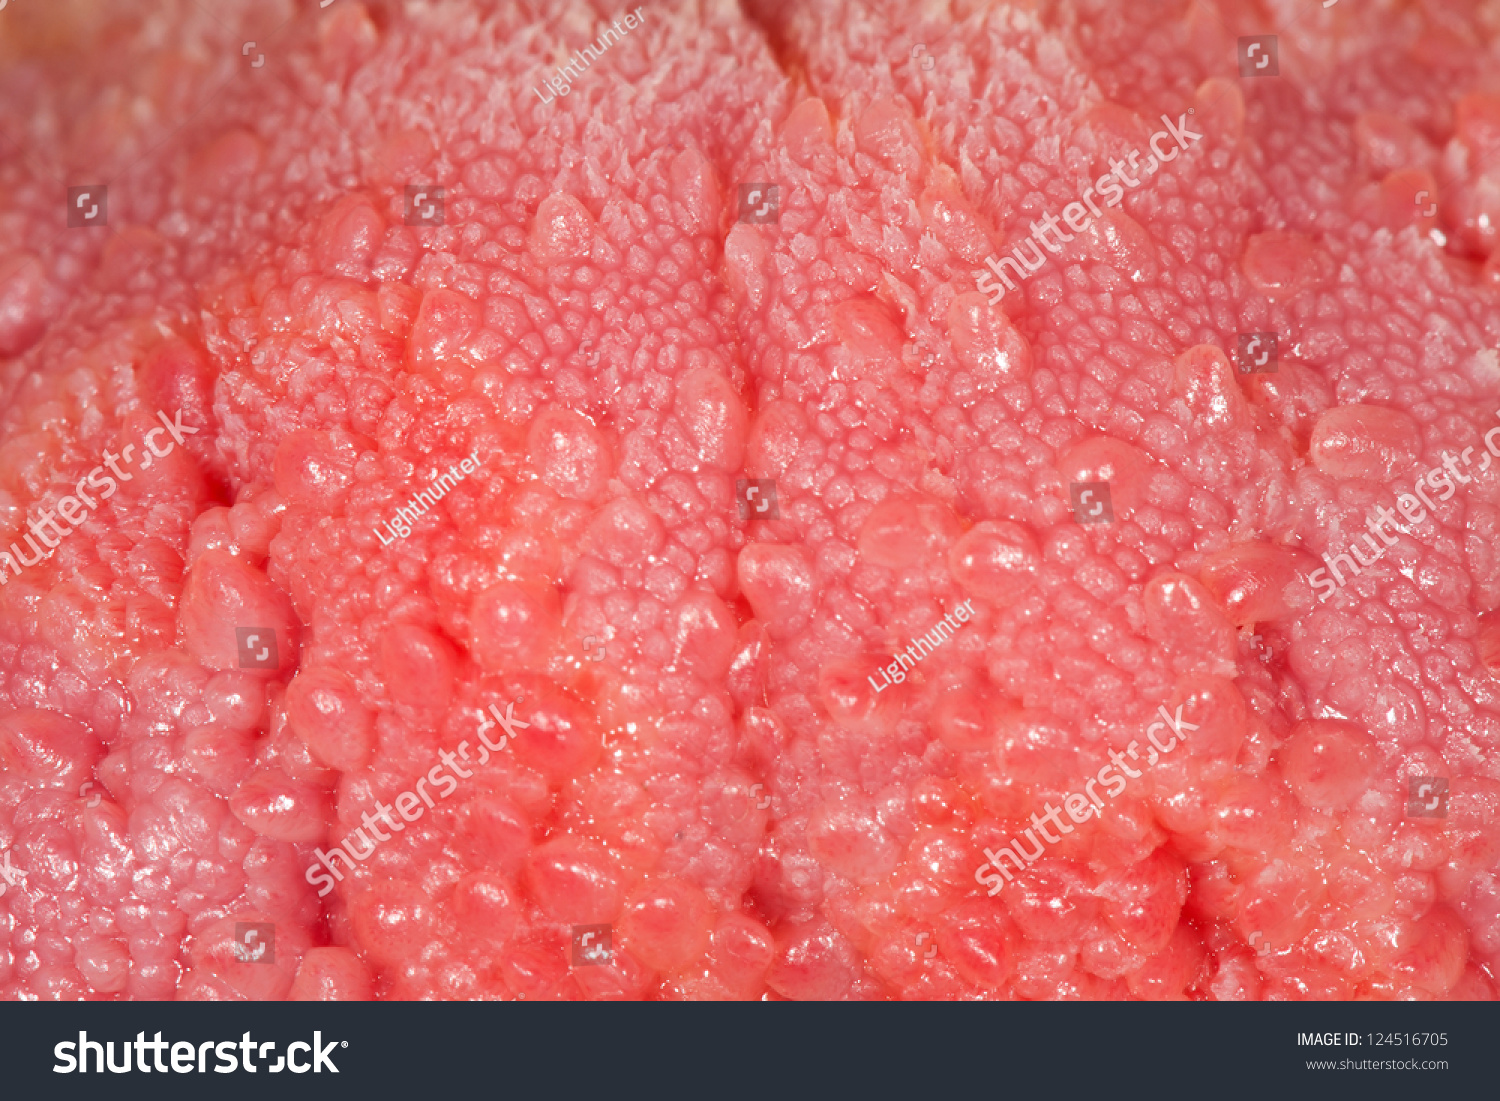 Close Up Pictures Of Human Tongue Papillae 47